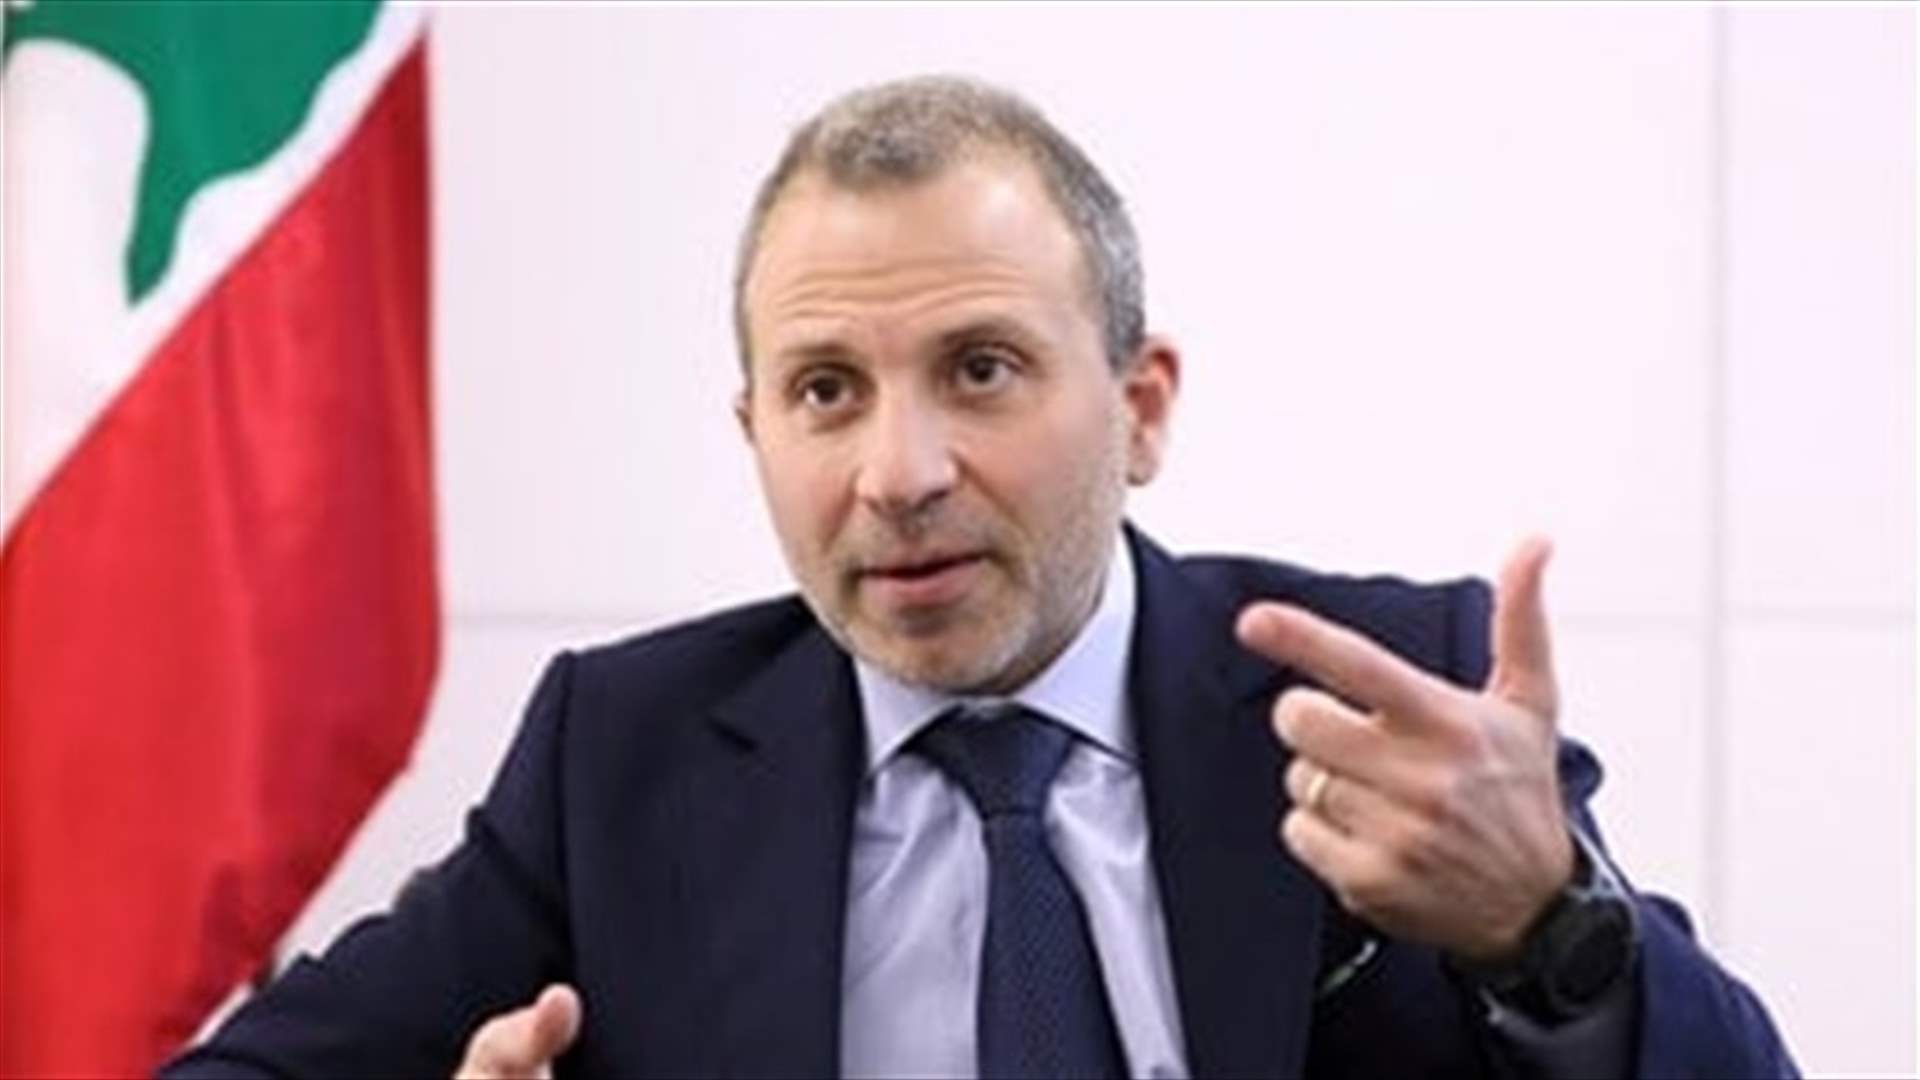 Bassil on October 13 Commemoration: We support the continuation of the investigation